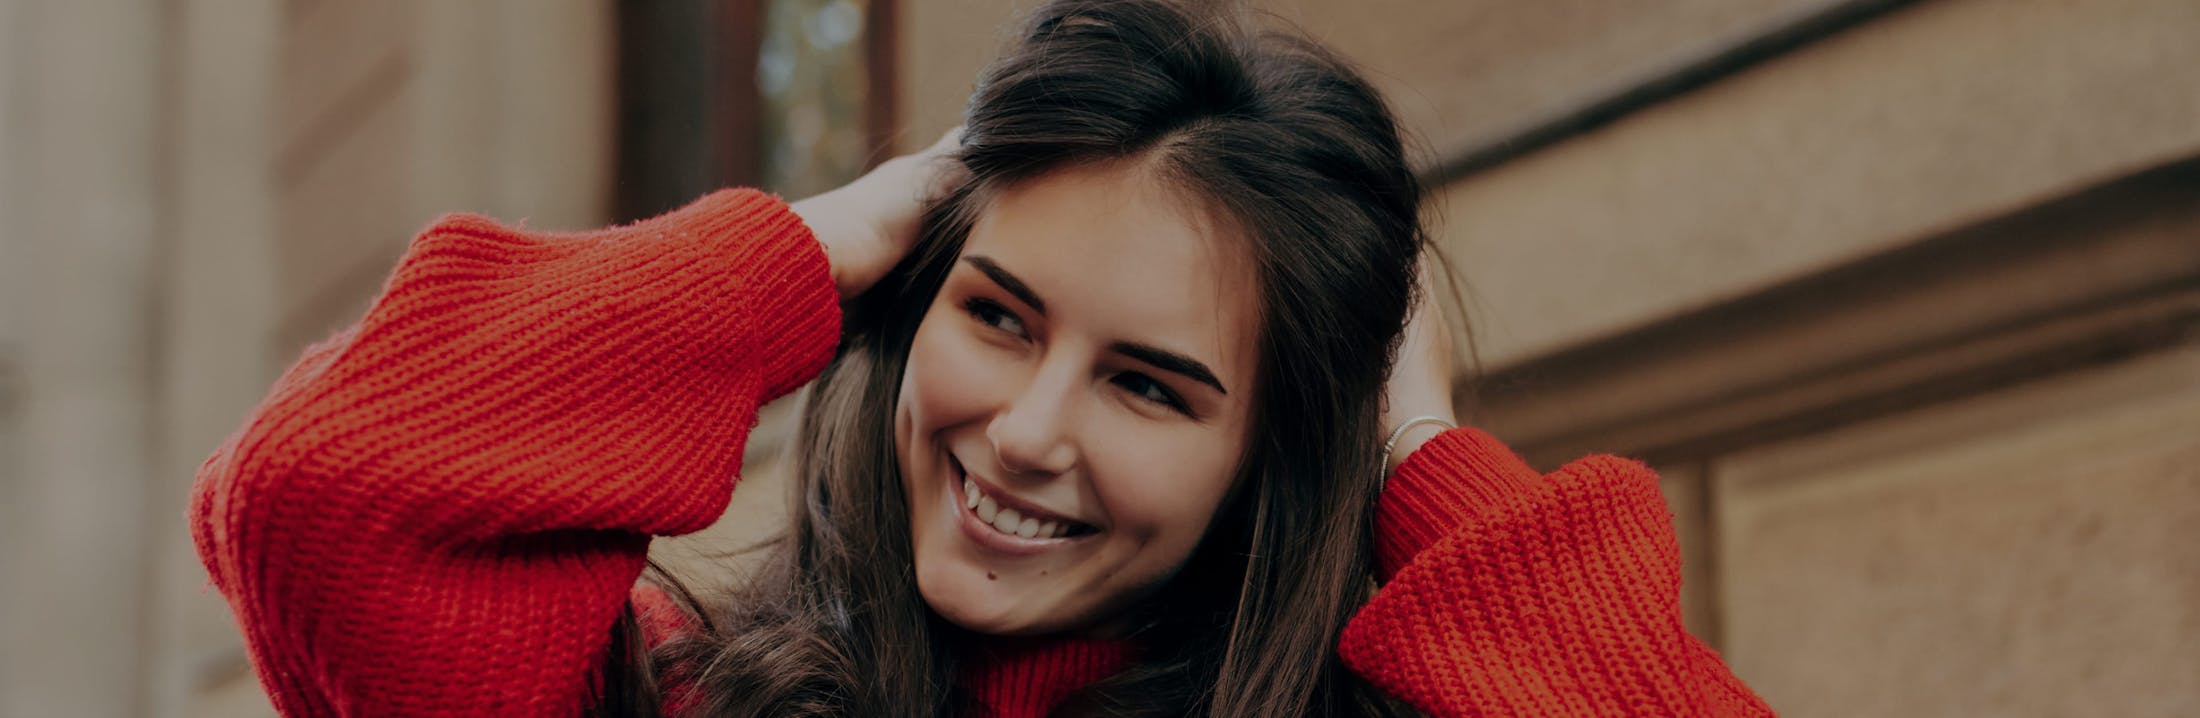 Woman in a red sweater smiling